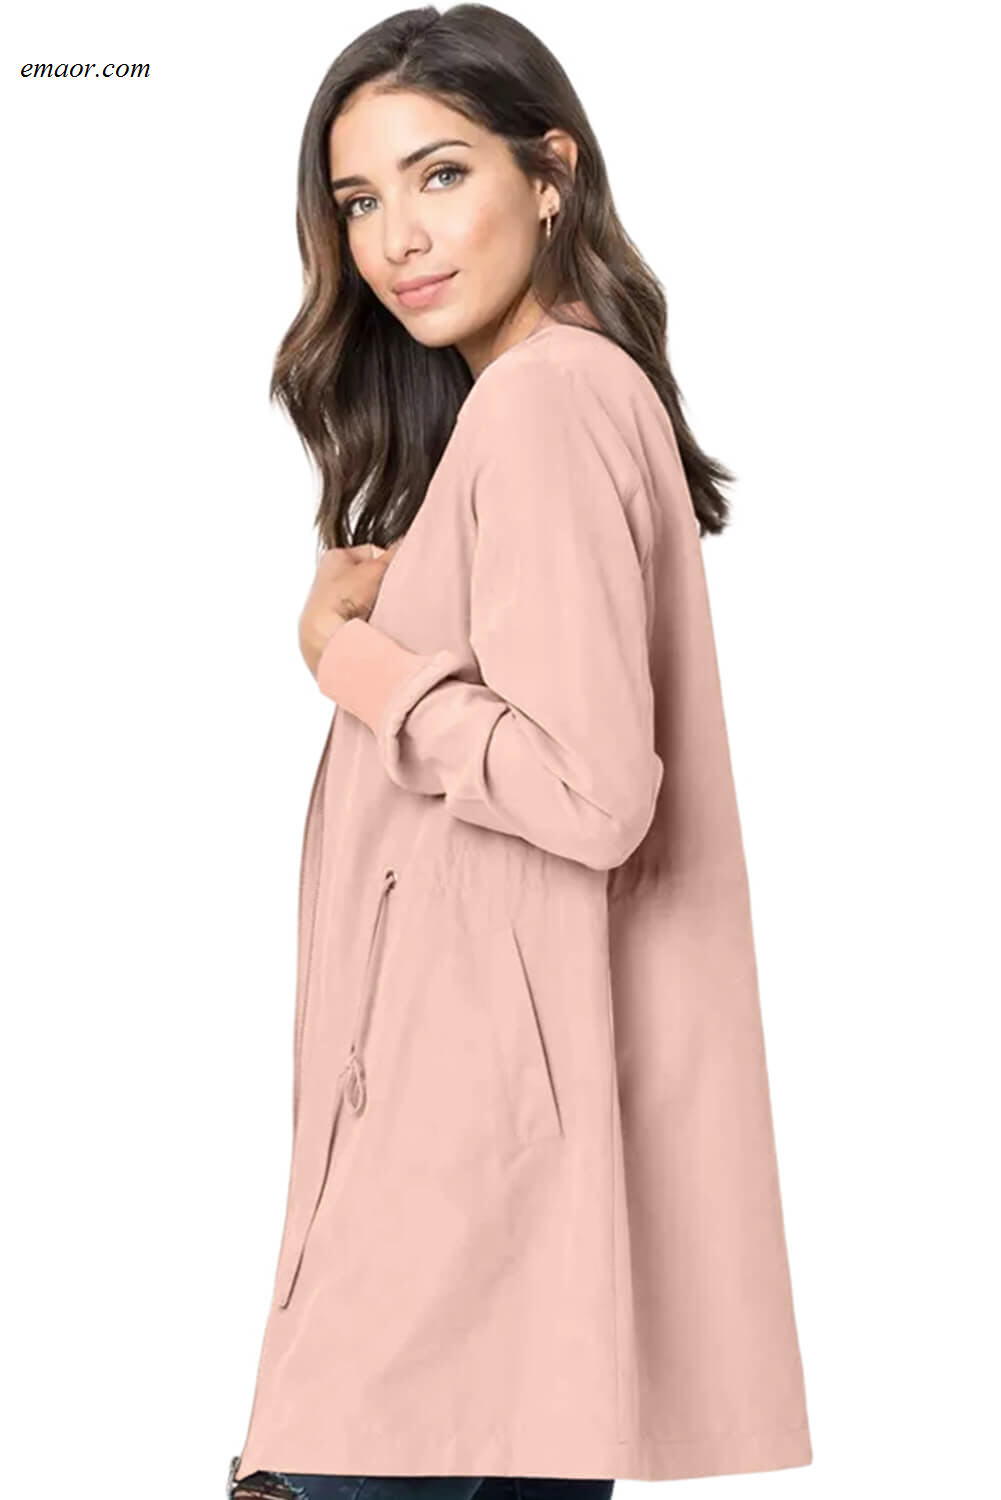  Outerwear Hot Women's Outerwear Long Sweater Jacket. Softy Outerwear Collection Jacket Outerwear